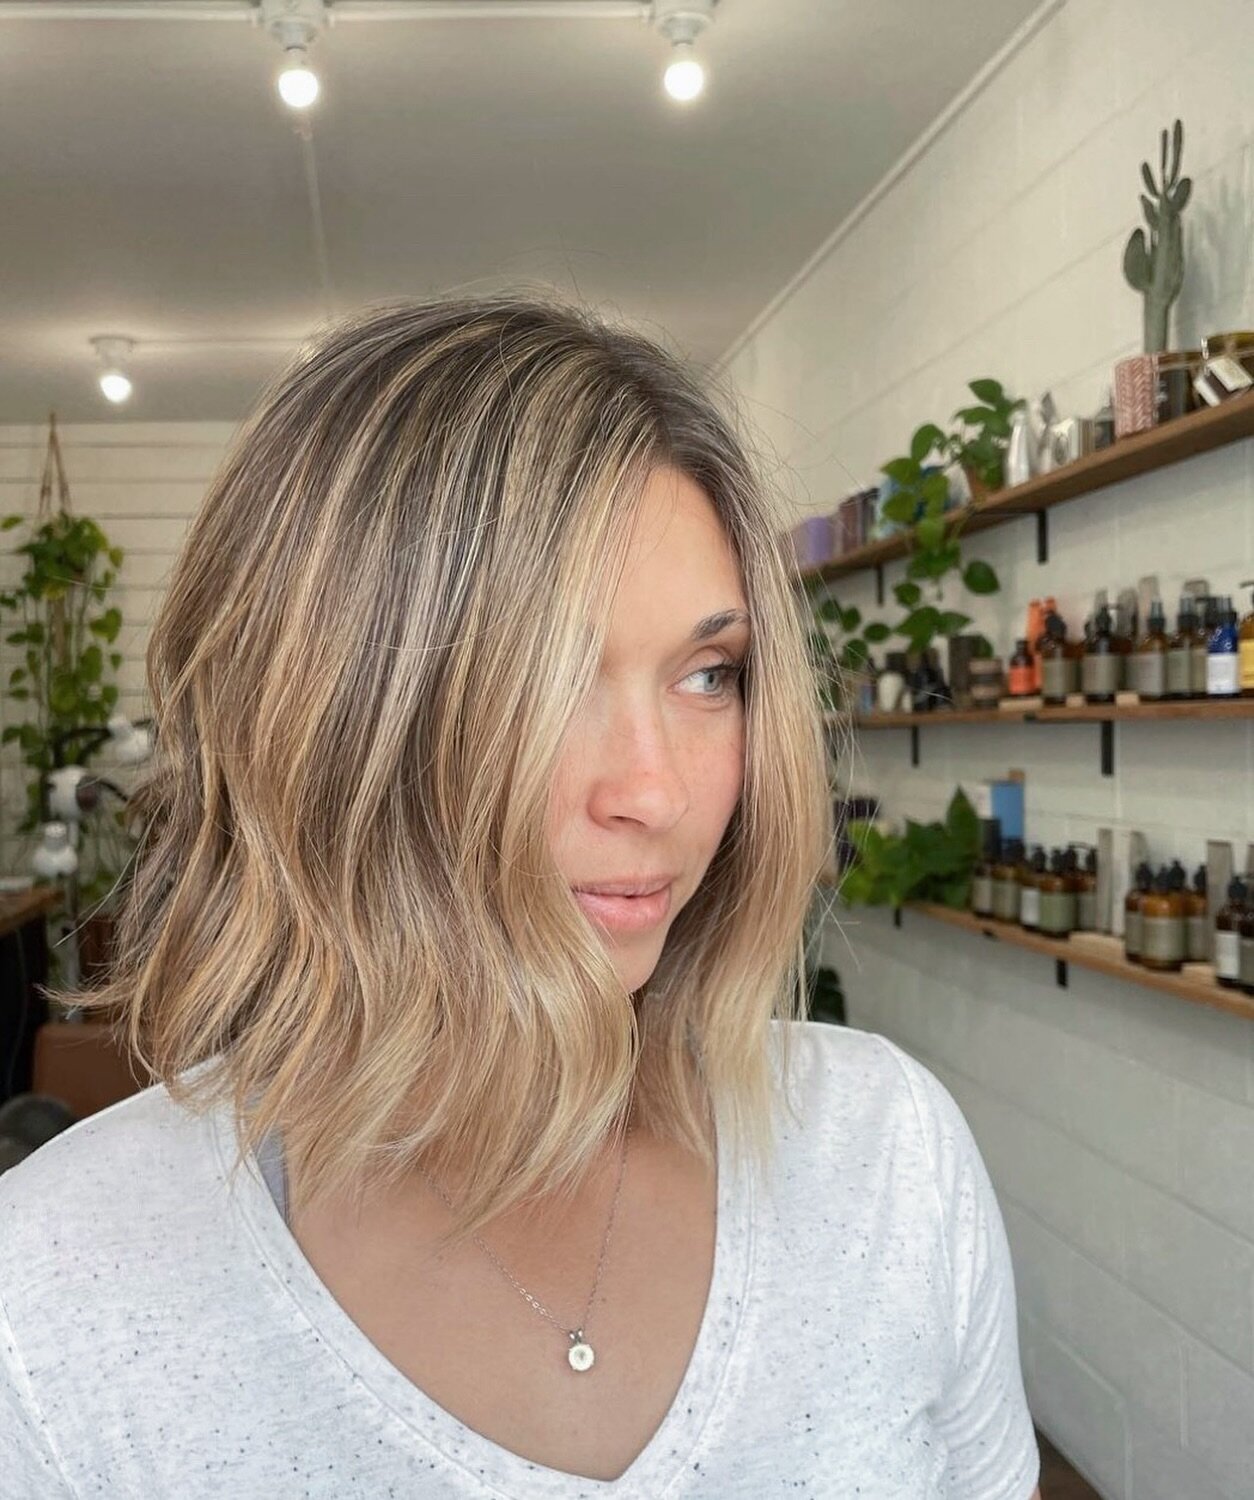 @whitneybenevedo.hairstylist brightening up this little textured bob. Yes, it may be a throwback but @em__michelle is just too cute!

#centralcoasthairstylist #805hair  #805hairstylist #livedinhair #livedincolor #sanluisobispohair
#slo #slohairstylis